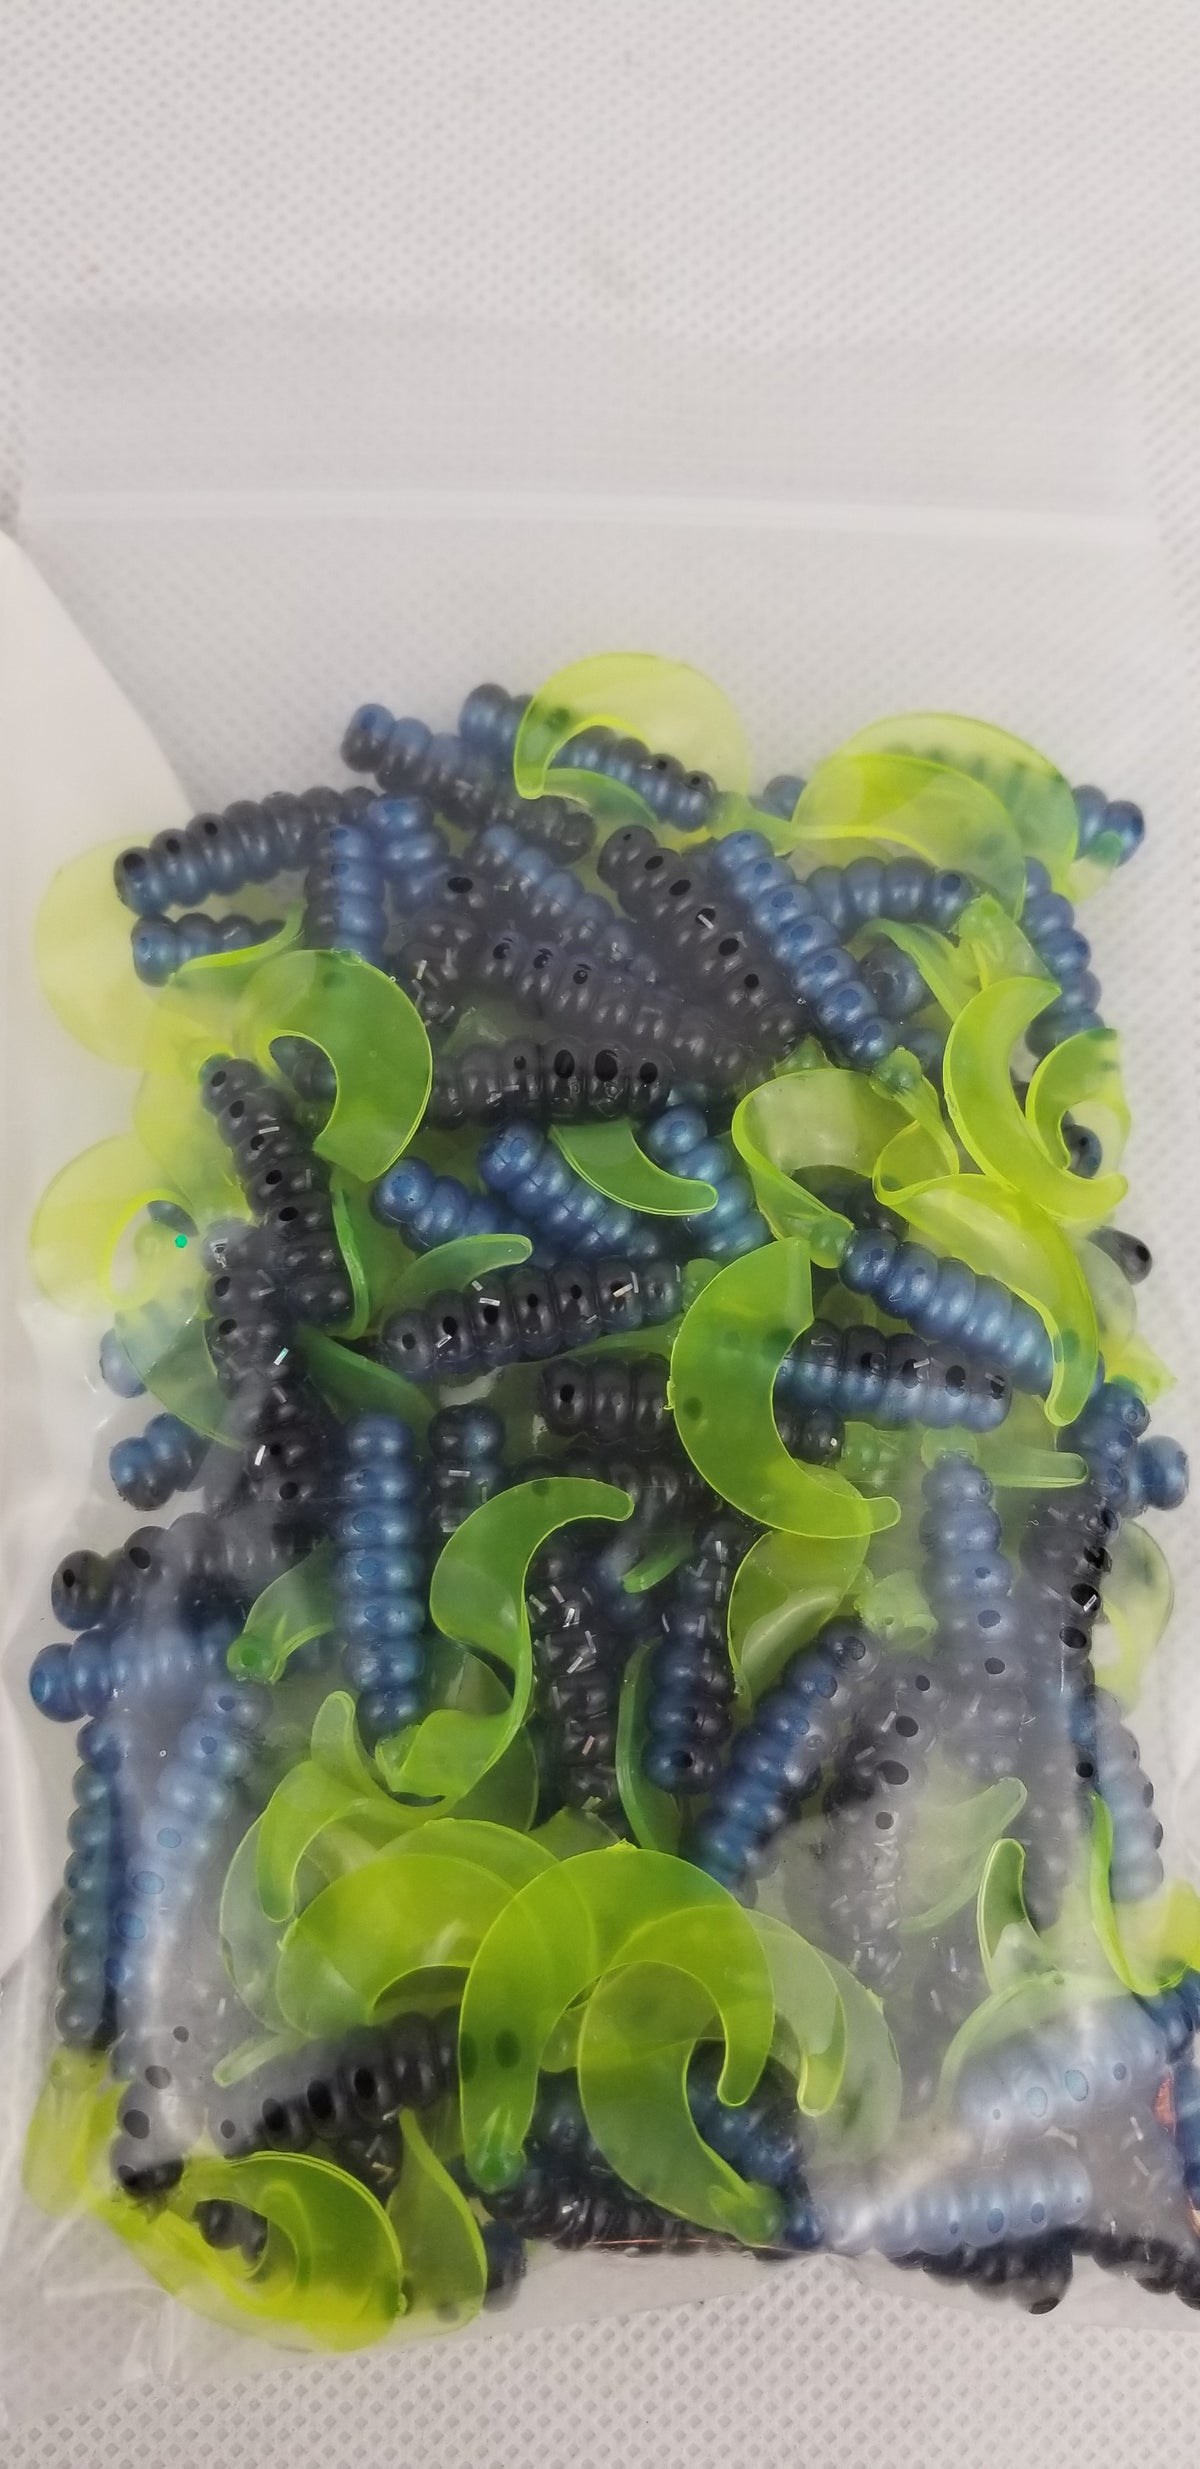 Cam's 2"(HOLOGRAM FLAKE)  CURLY TAIL 100pc BLUE BLACK & CHARTREUSE Crappie Soft Jigs [A Cam's Exclusive]